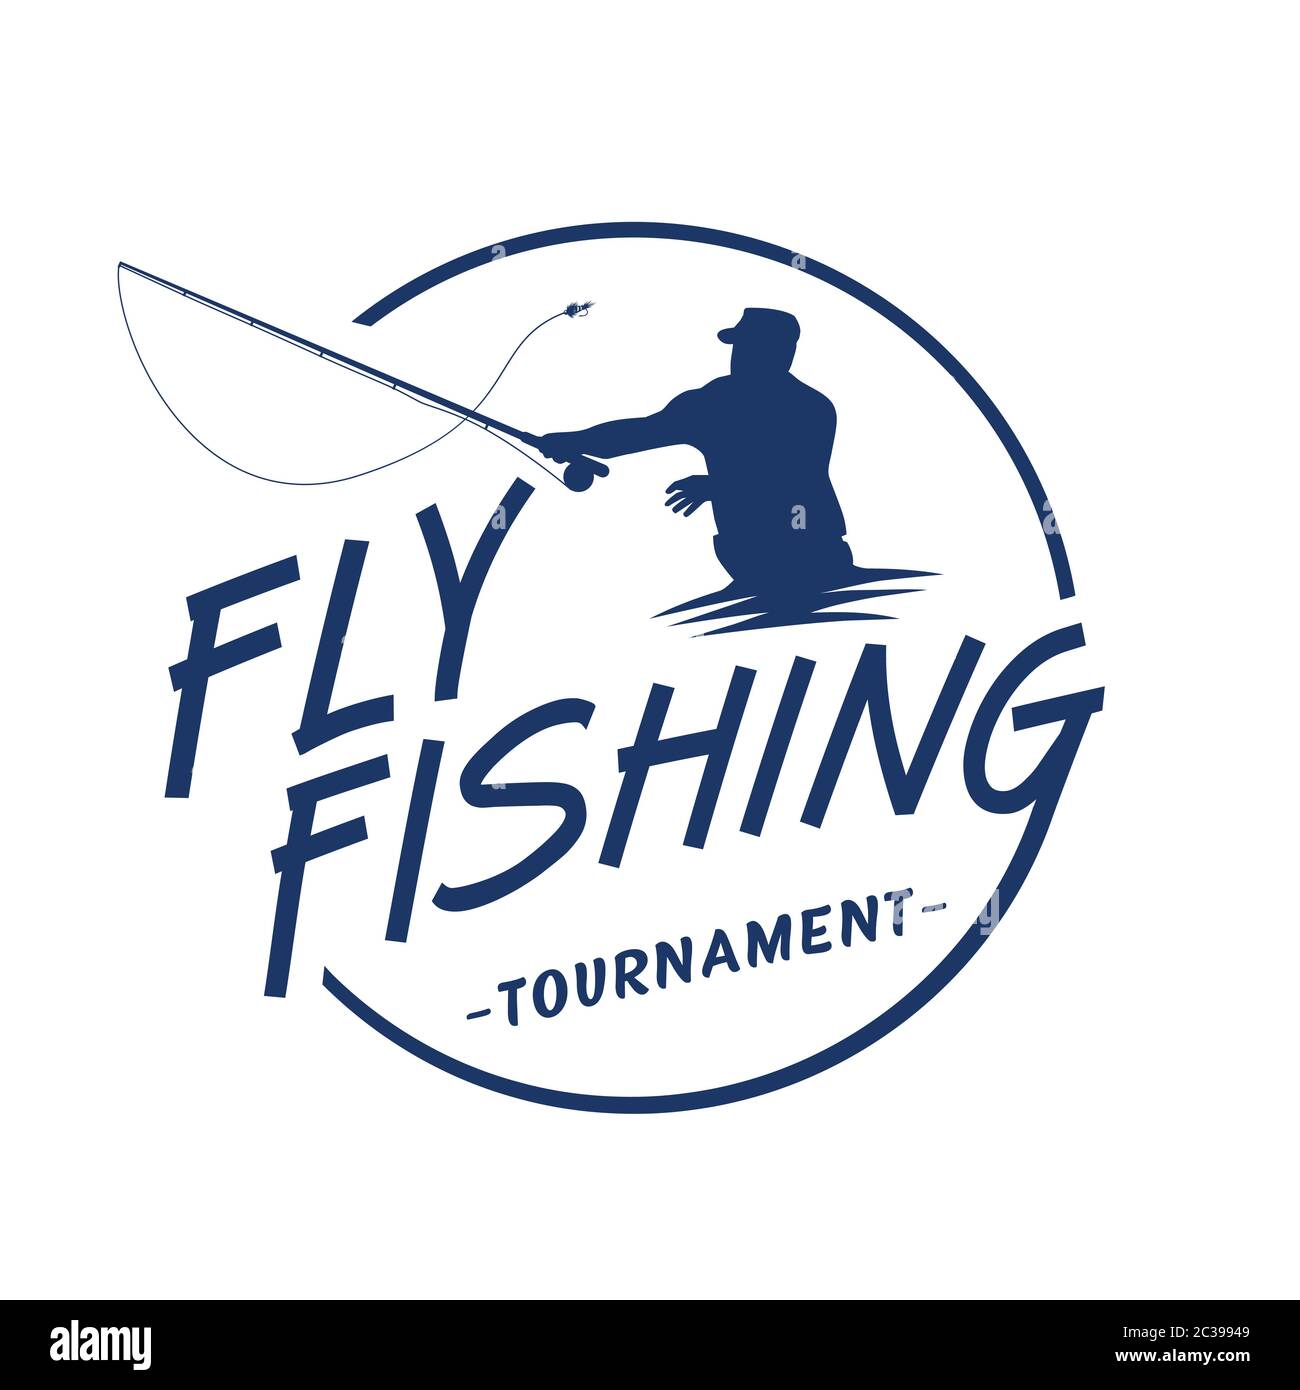 Fly fishing tournament logo. Vector and illustration Stock Vector